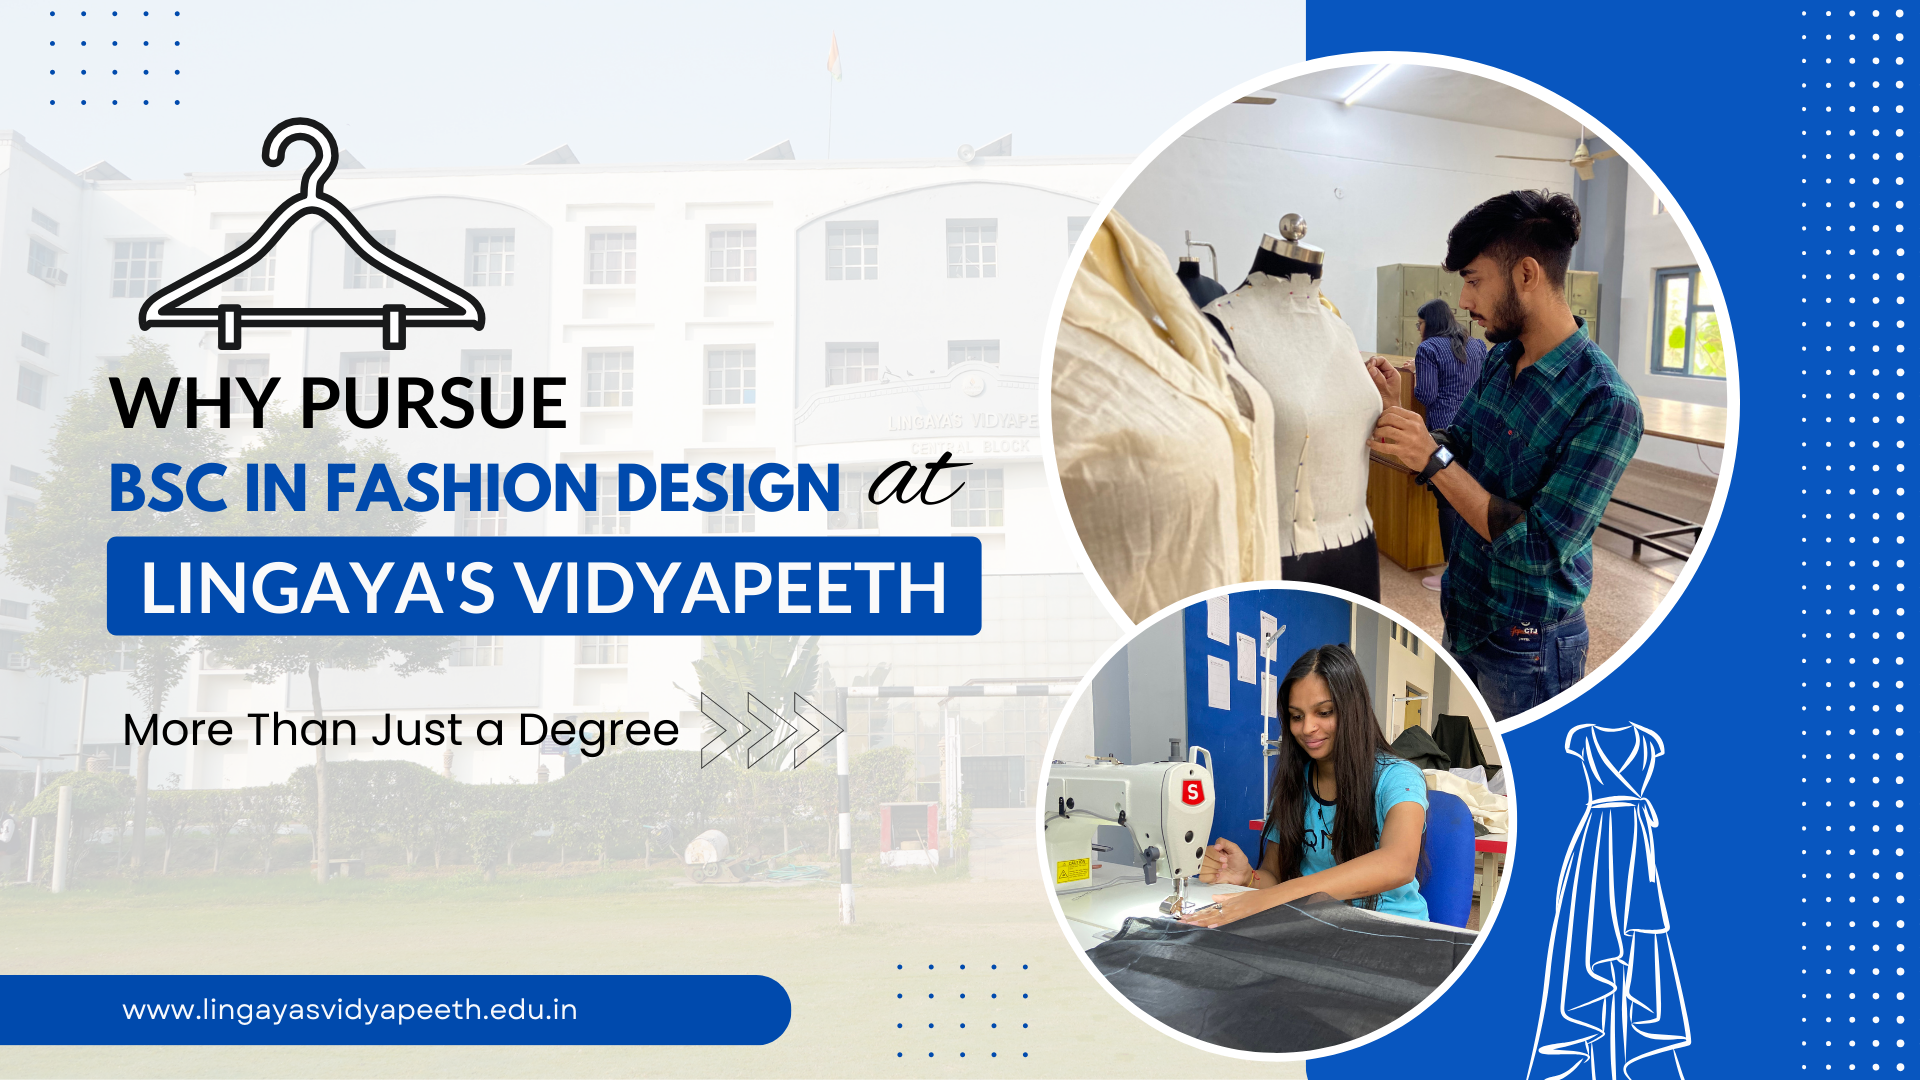 More Than Just a Degree: Why Pursue a BSc in Fashion Design at Lingaya’s Vidyapeeth?